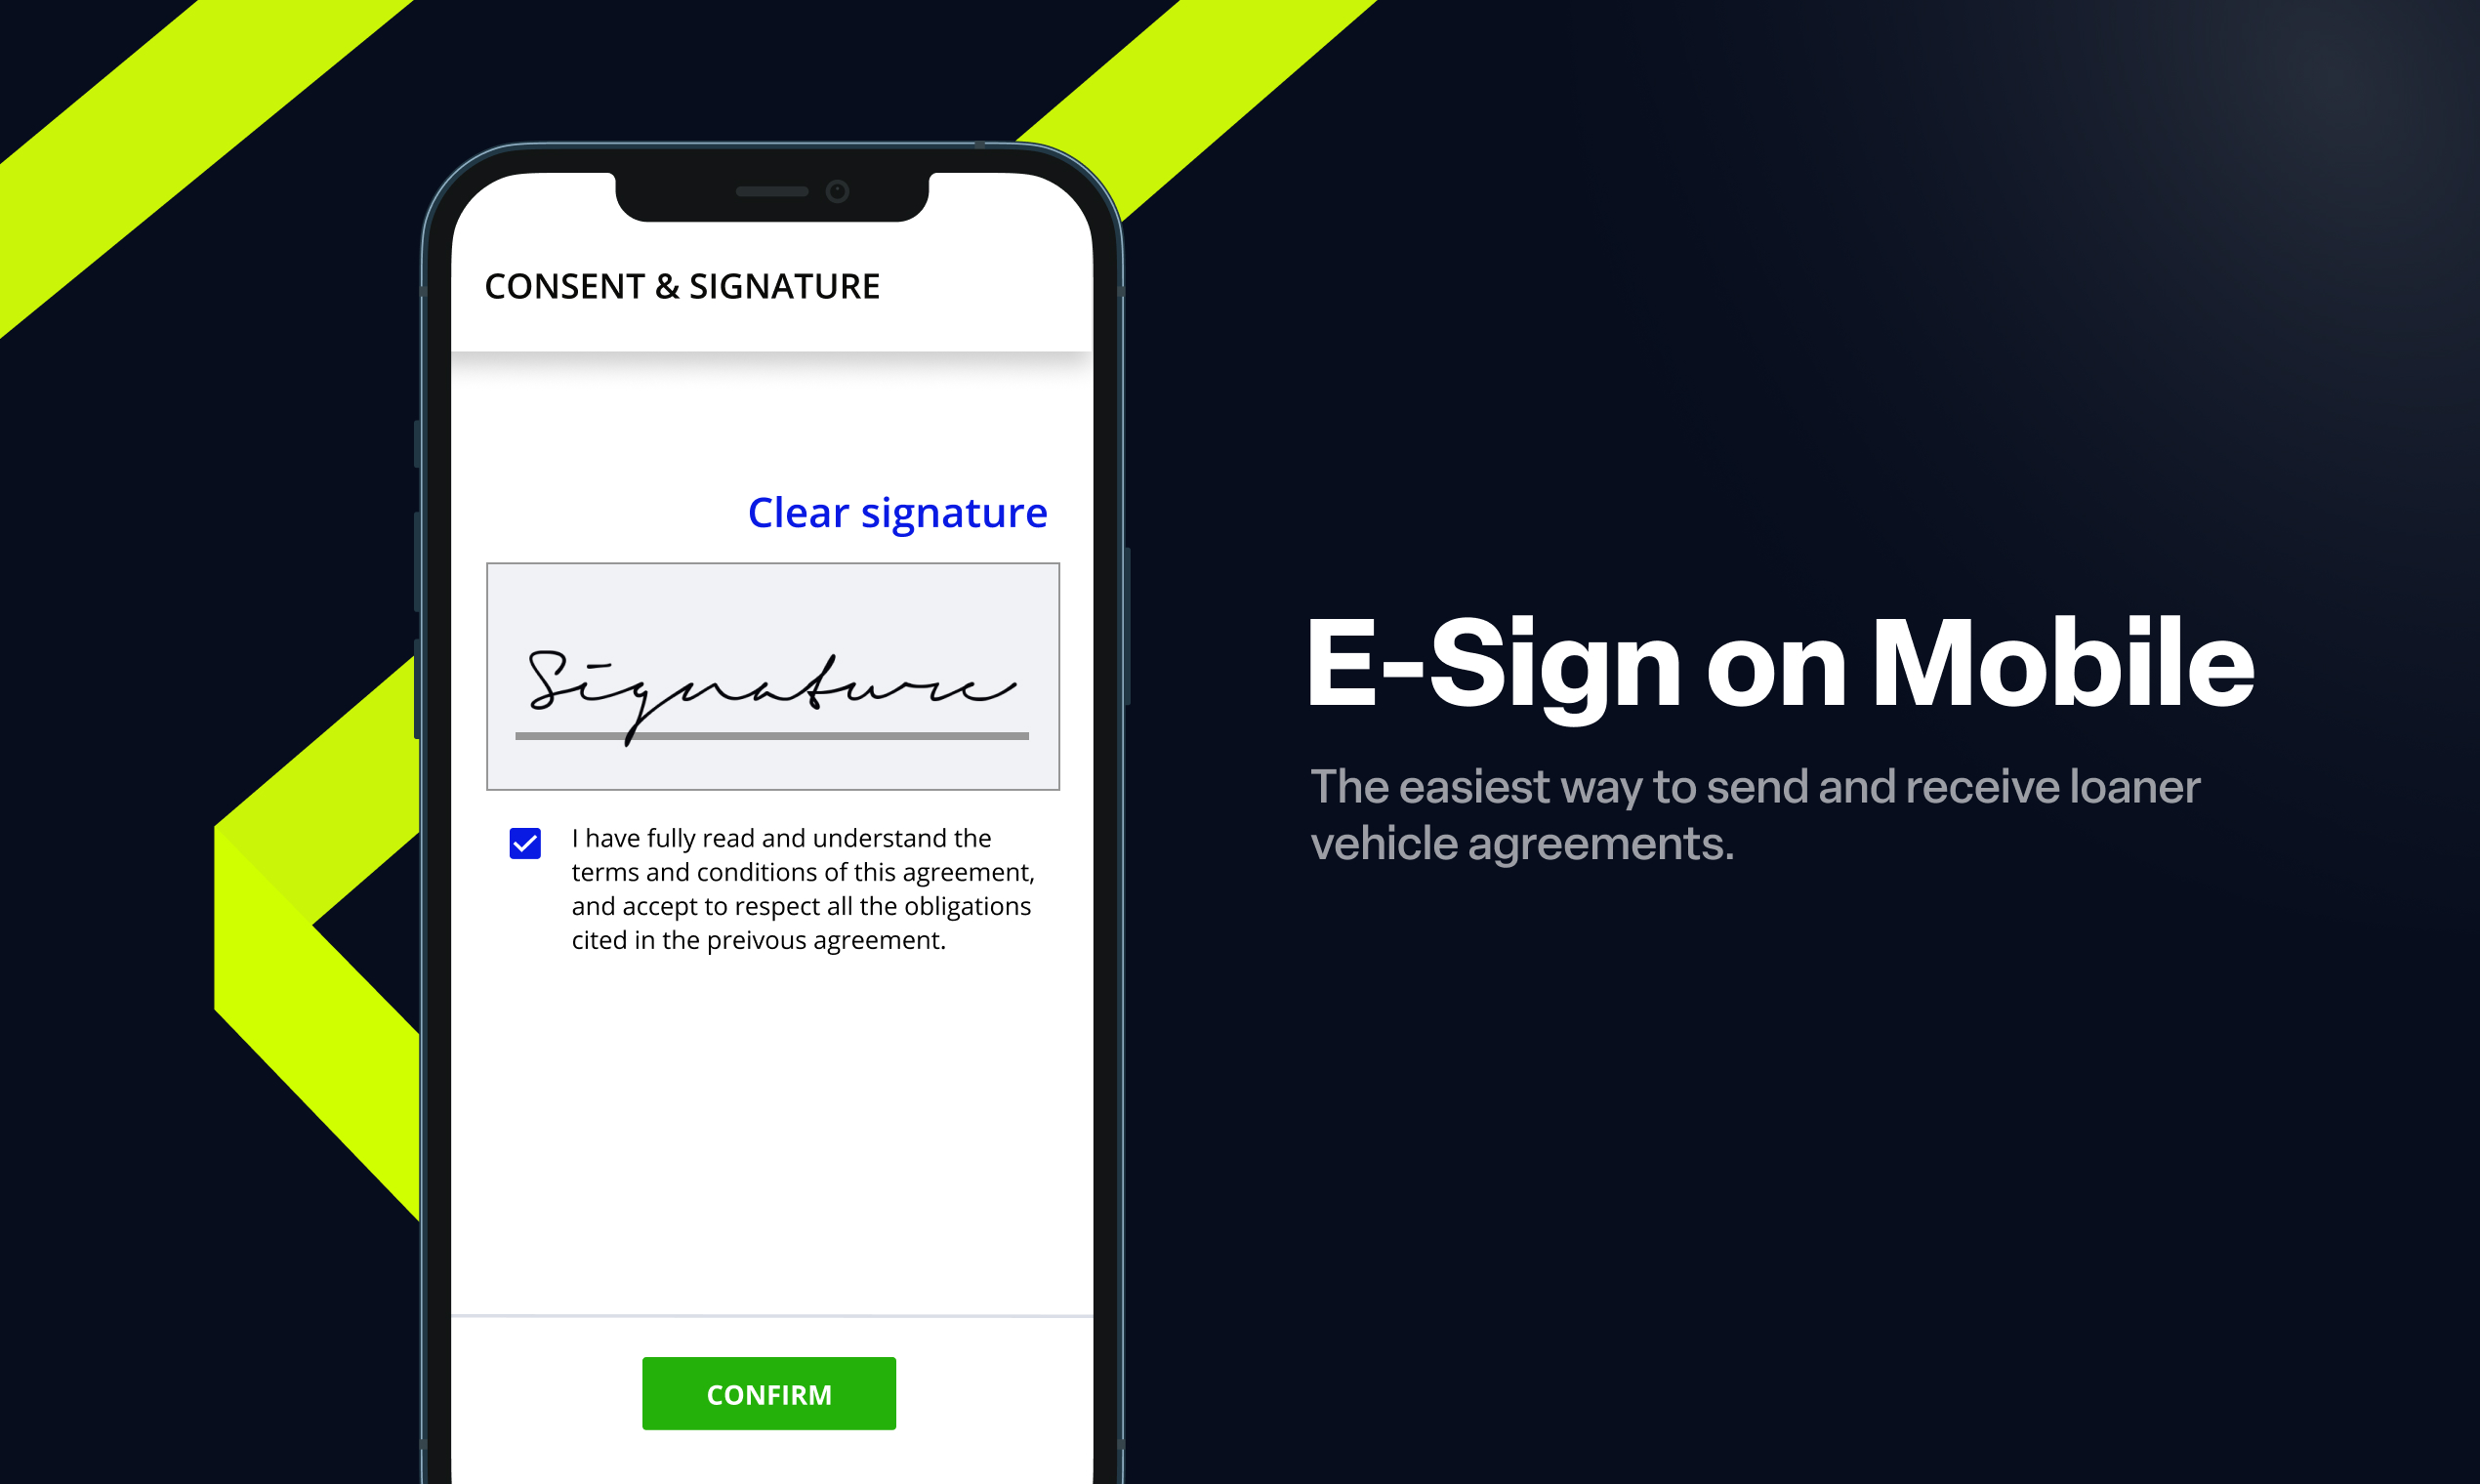 E-Sign – The easiest way to send and receive loaner vehicle agreements.